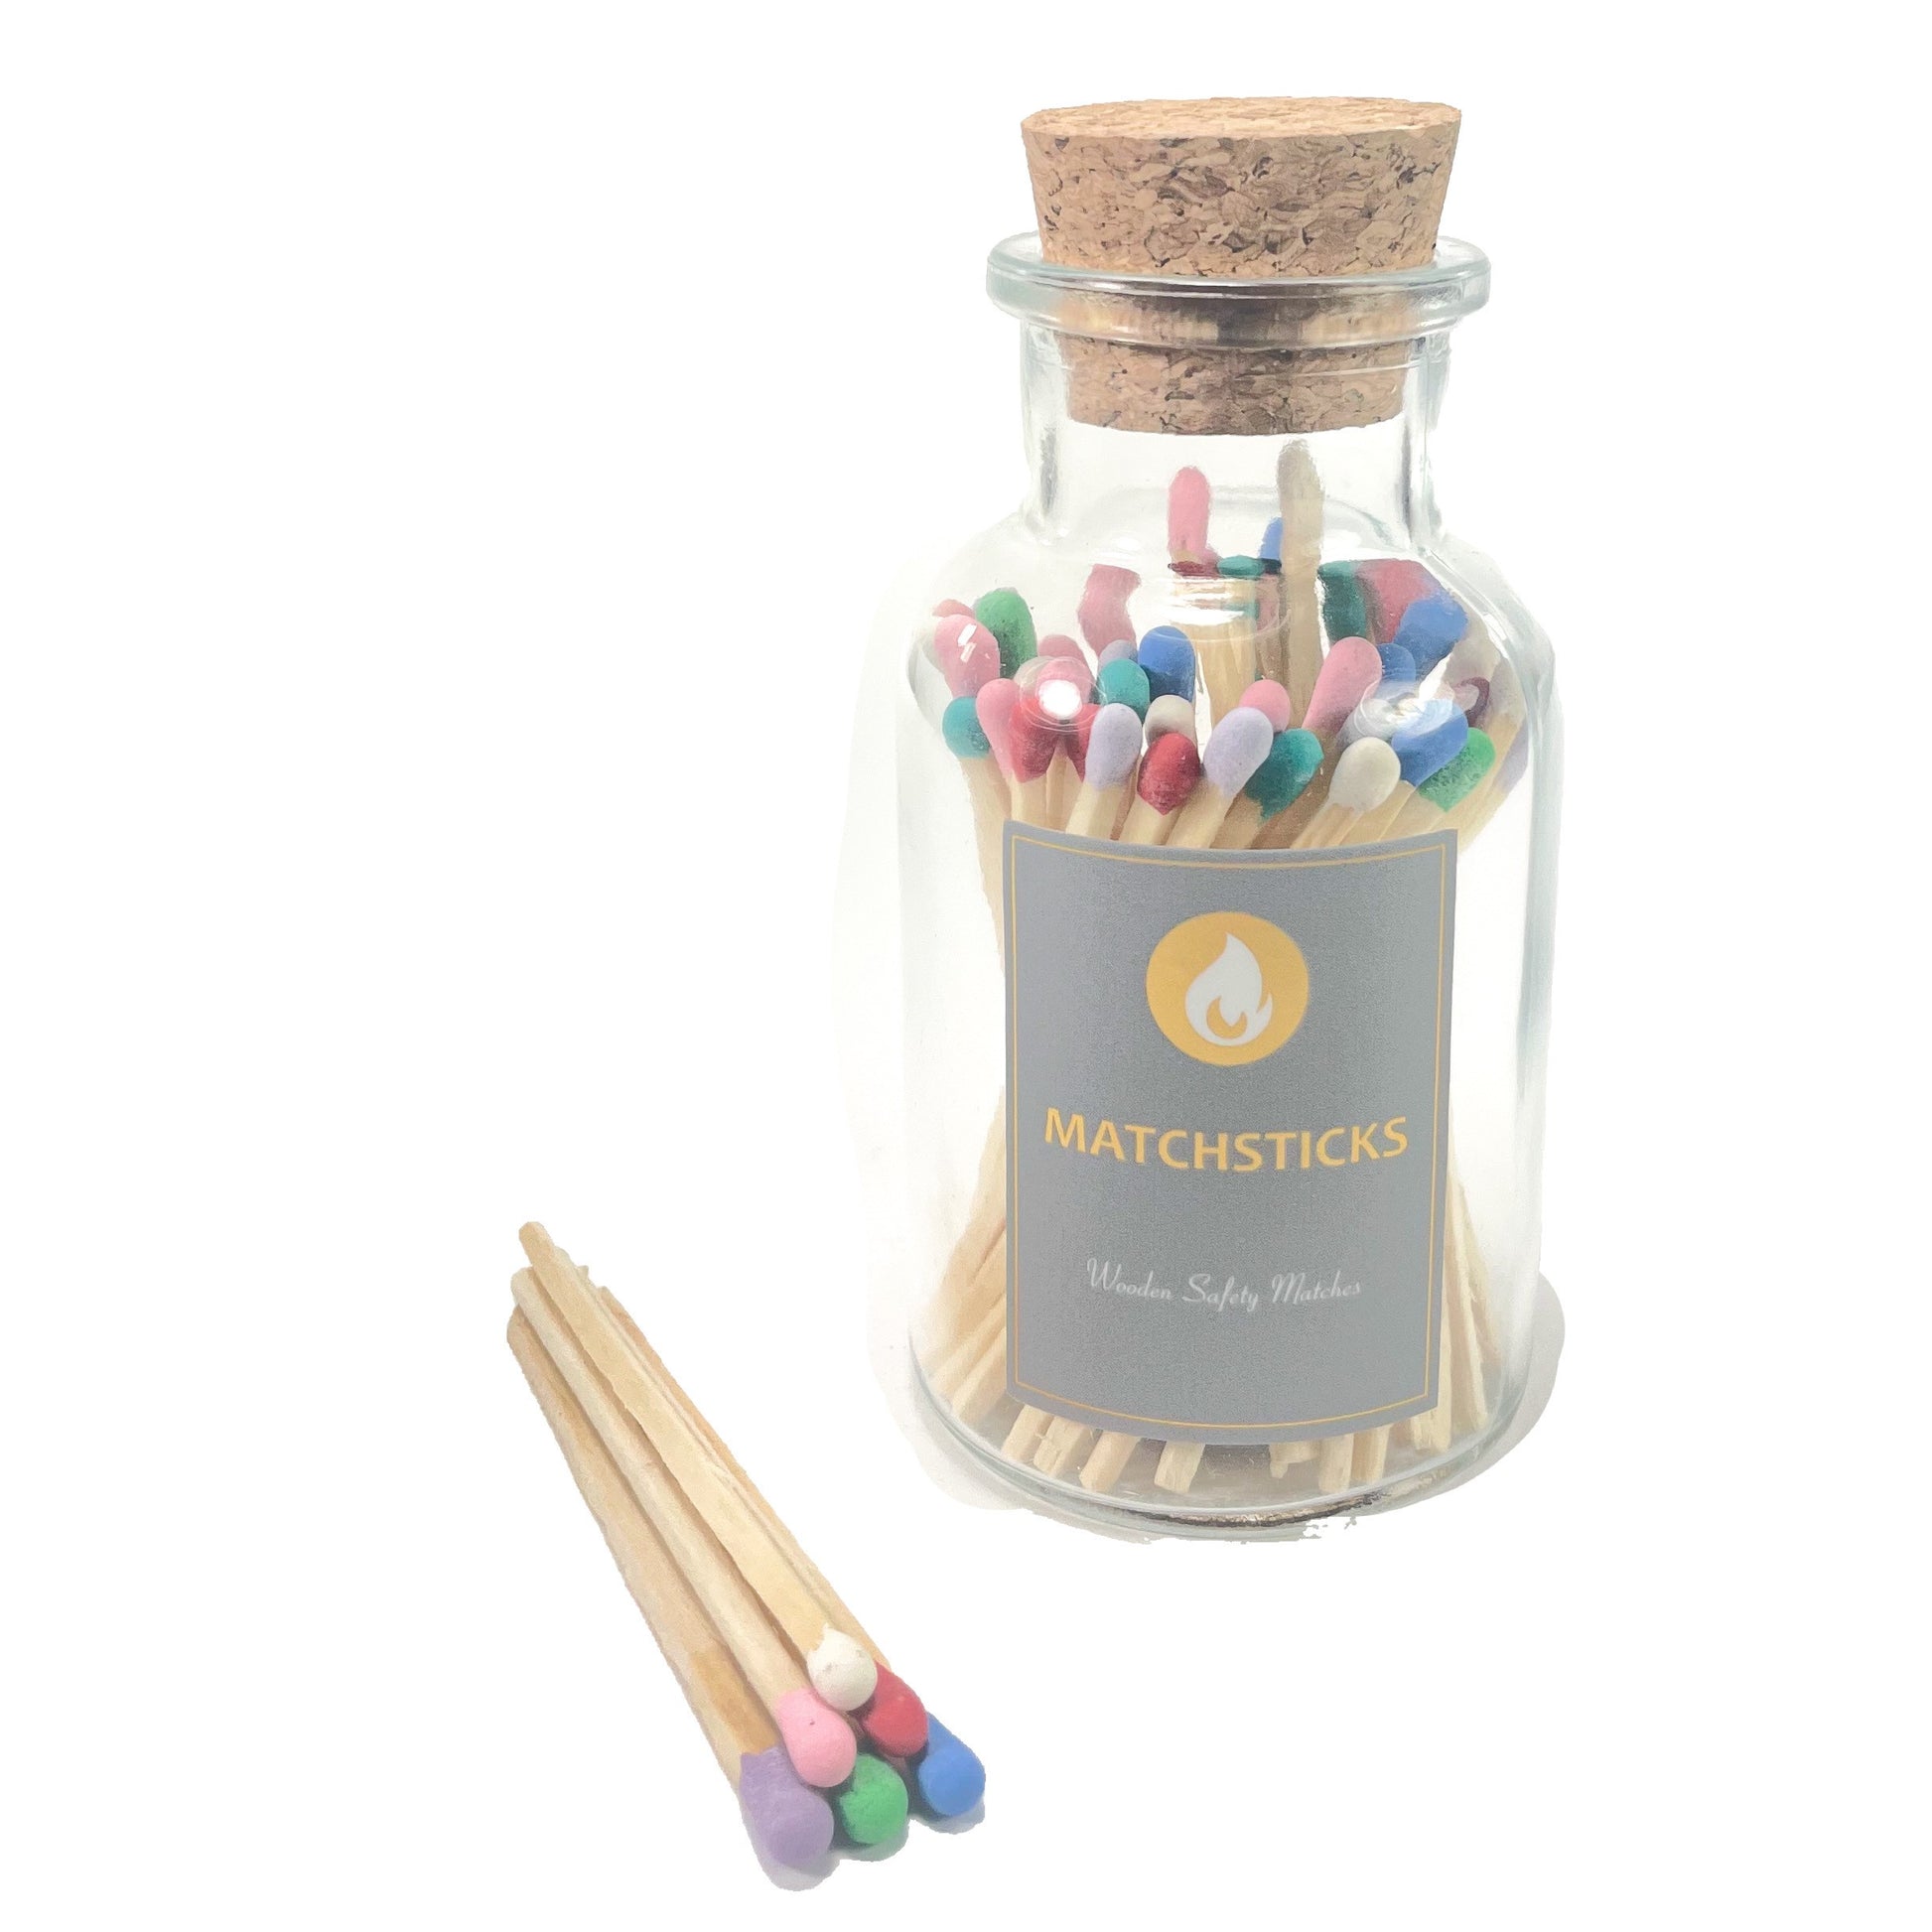 2 Rainbow Matches in a Jar + Striker Stickers Included | 100 Vibrantly  Colorful Decorative Safety Matches with a Cork Top Glass Holder | Gifts,  Home